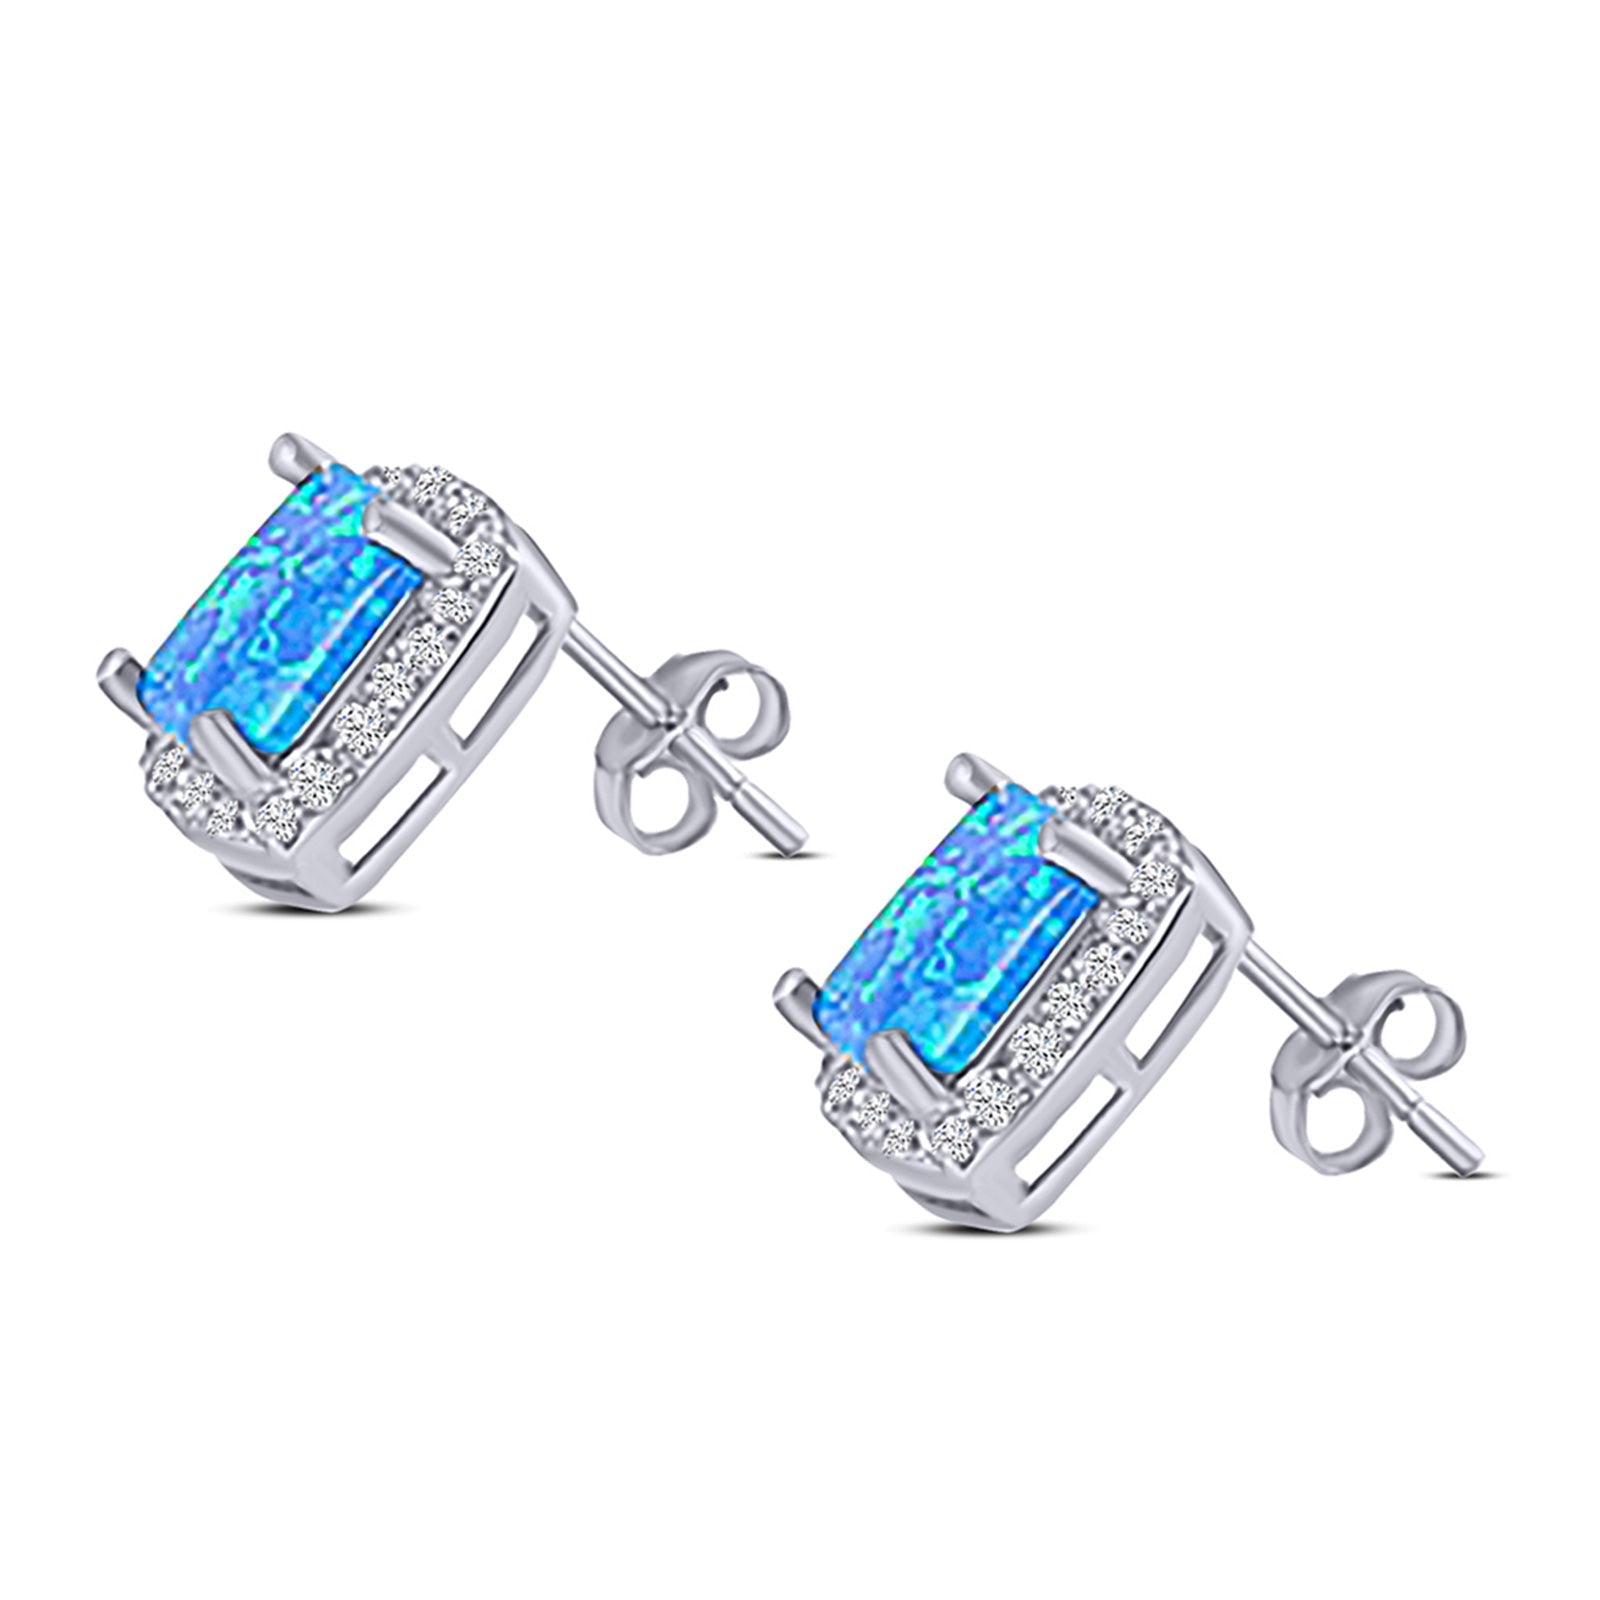 Halo Art Deco Cushion Cut Stud Earring Created Opal Solid 925 Sterling Silver (11mm)